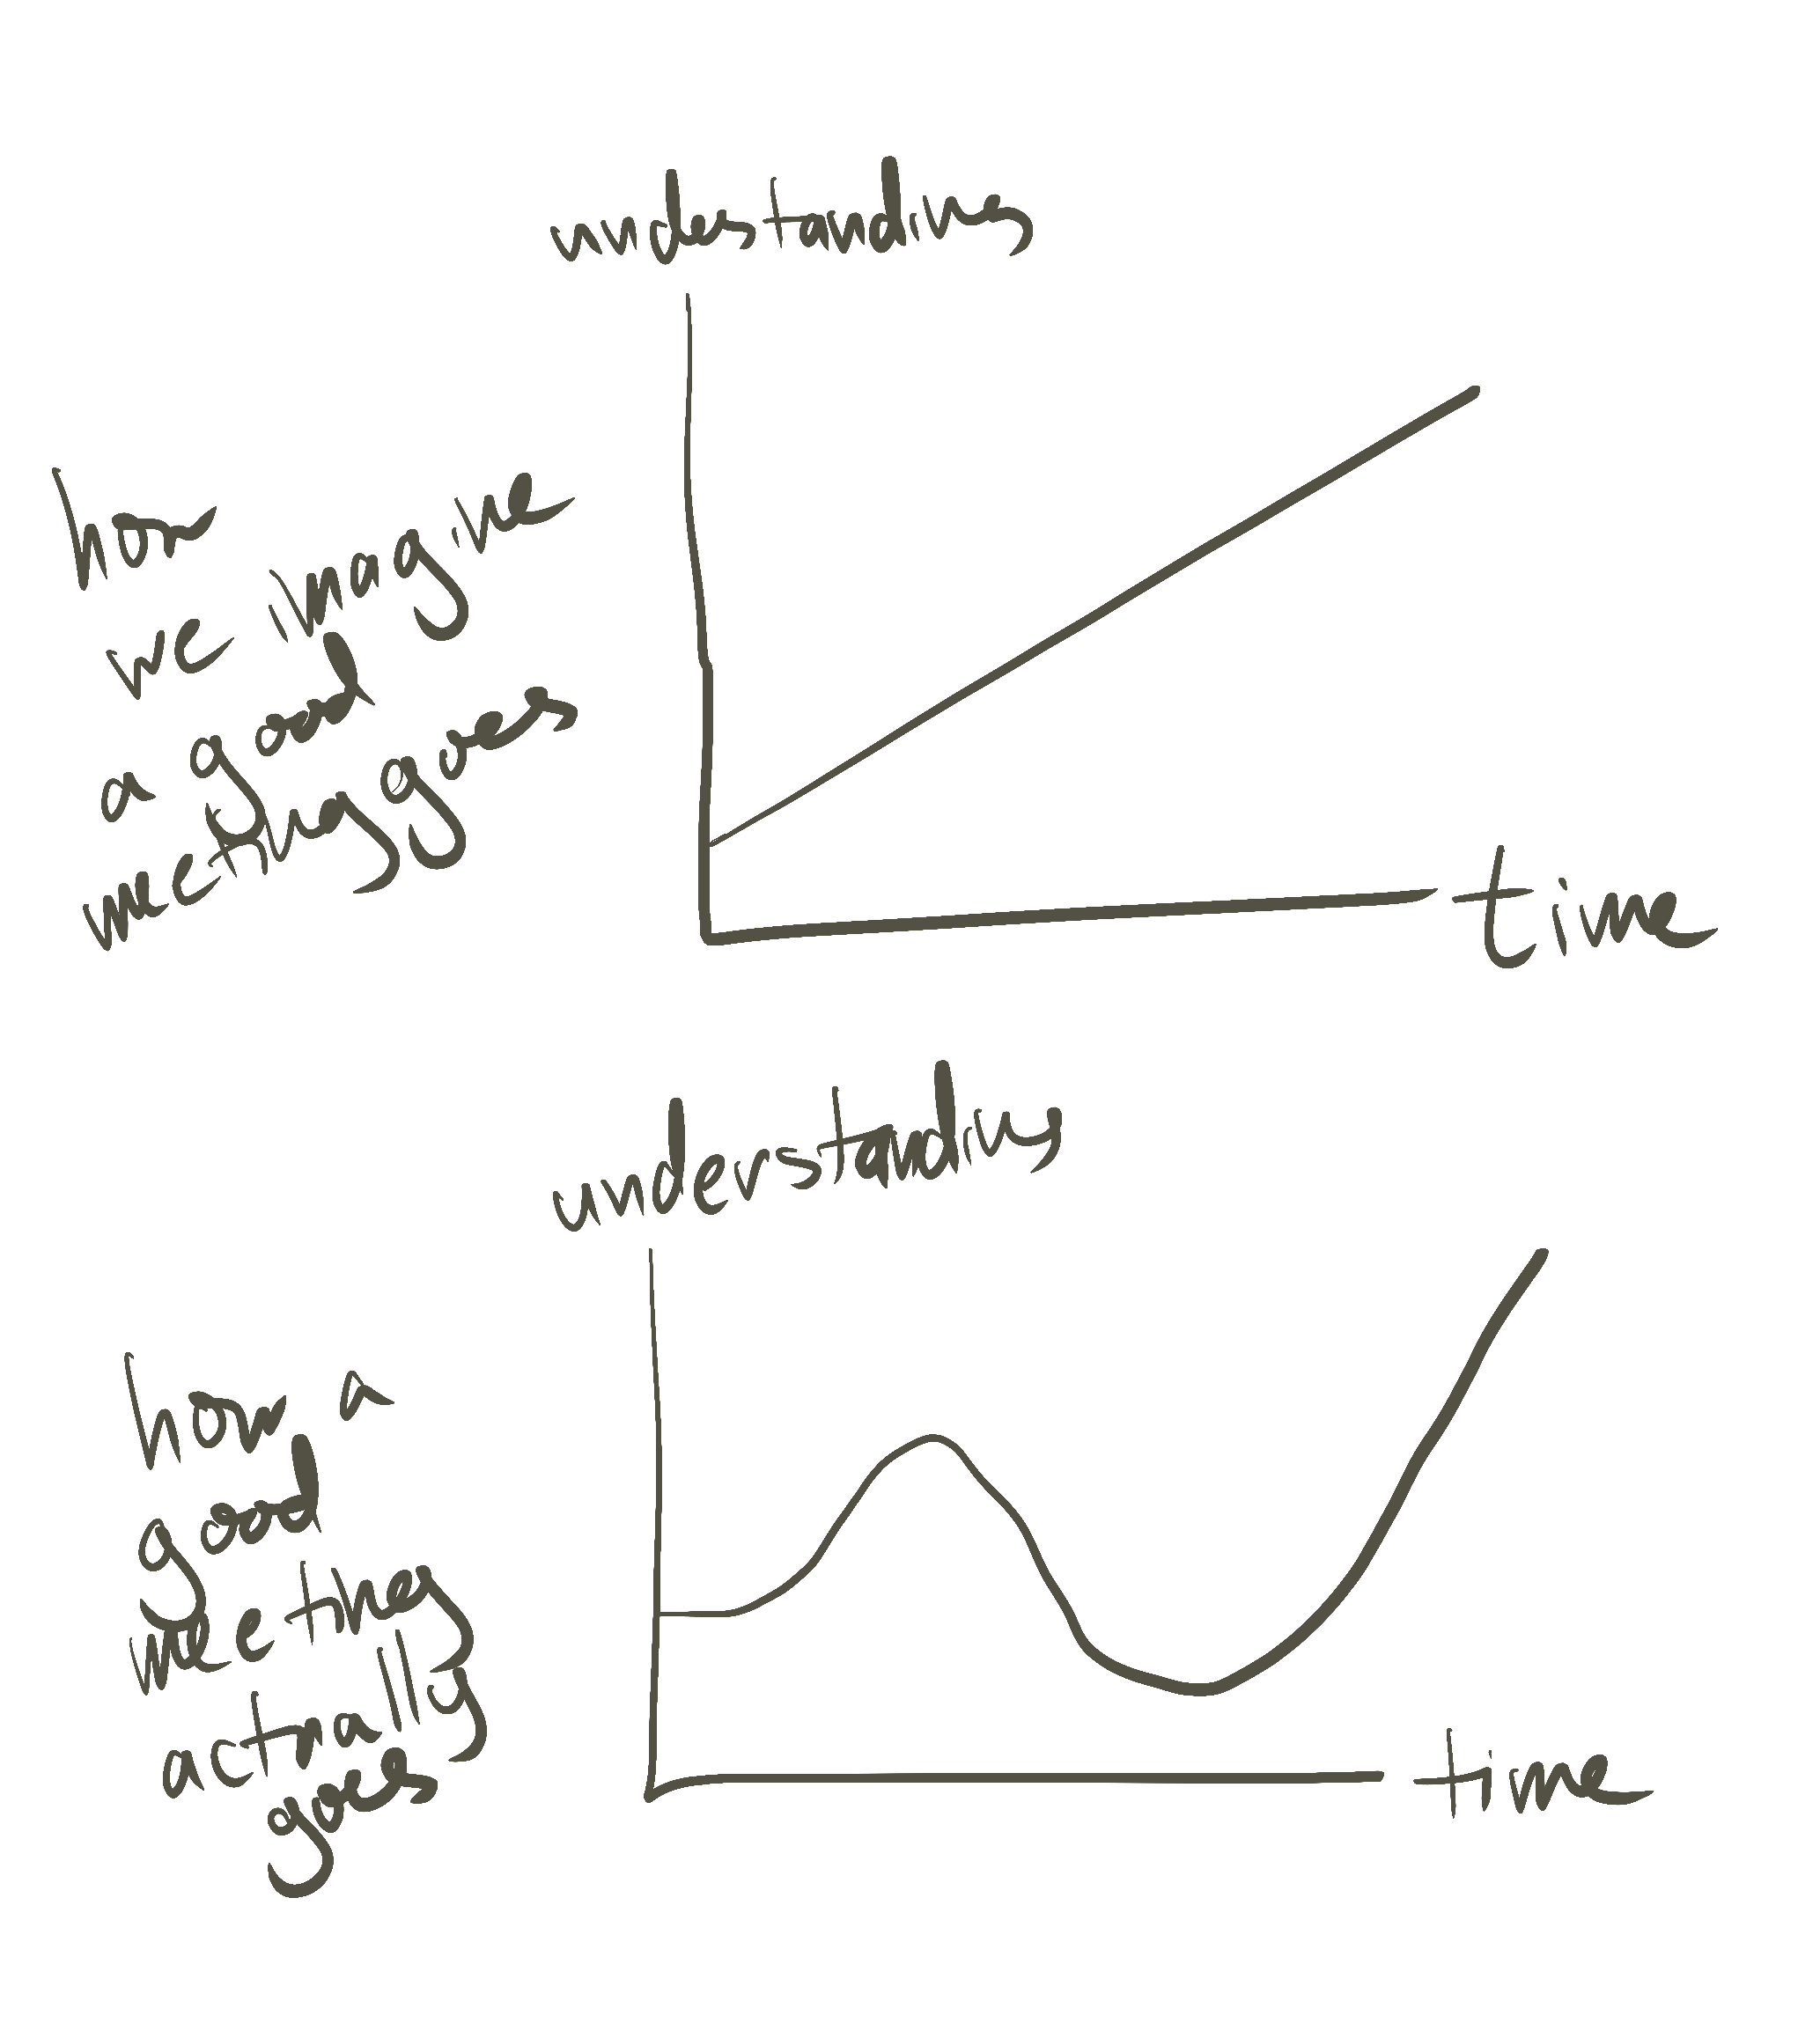 Graphs of what a good meeting actually looks like compared to what we imagine it looking like. Where the x axis is time and the y axis is shared understanding